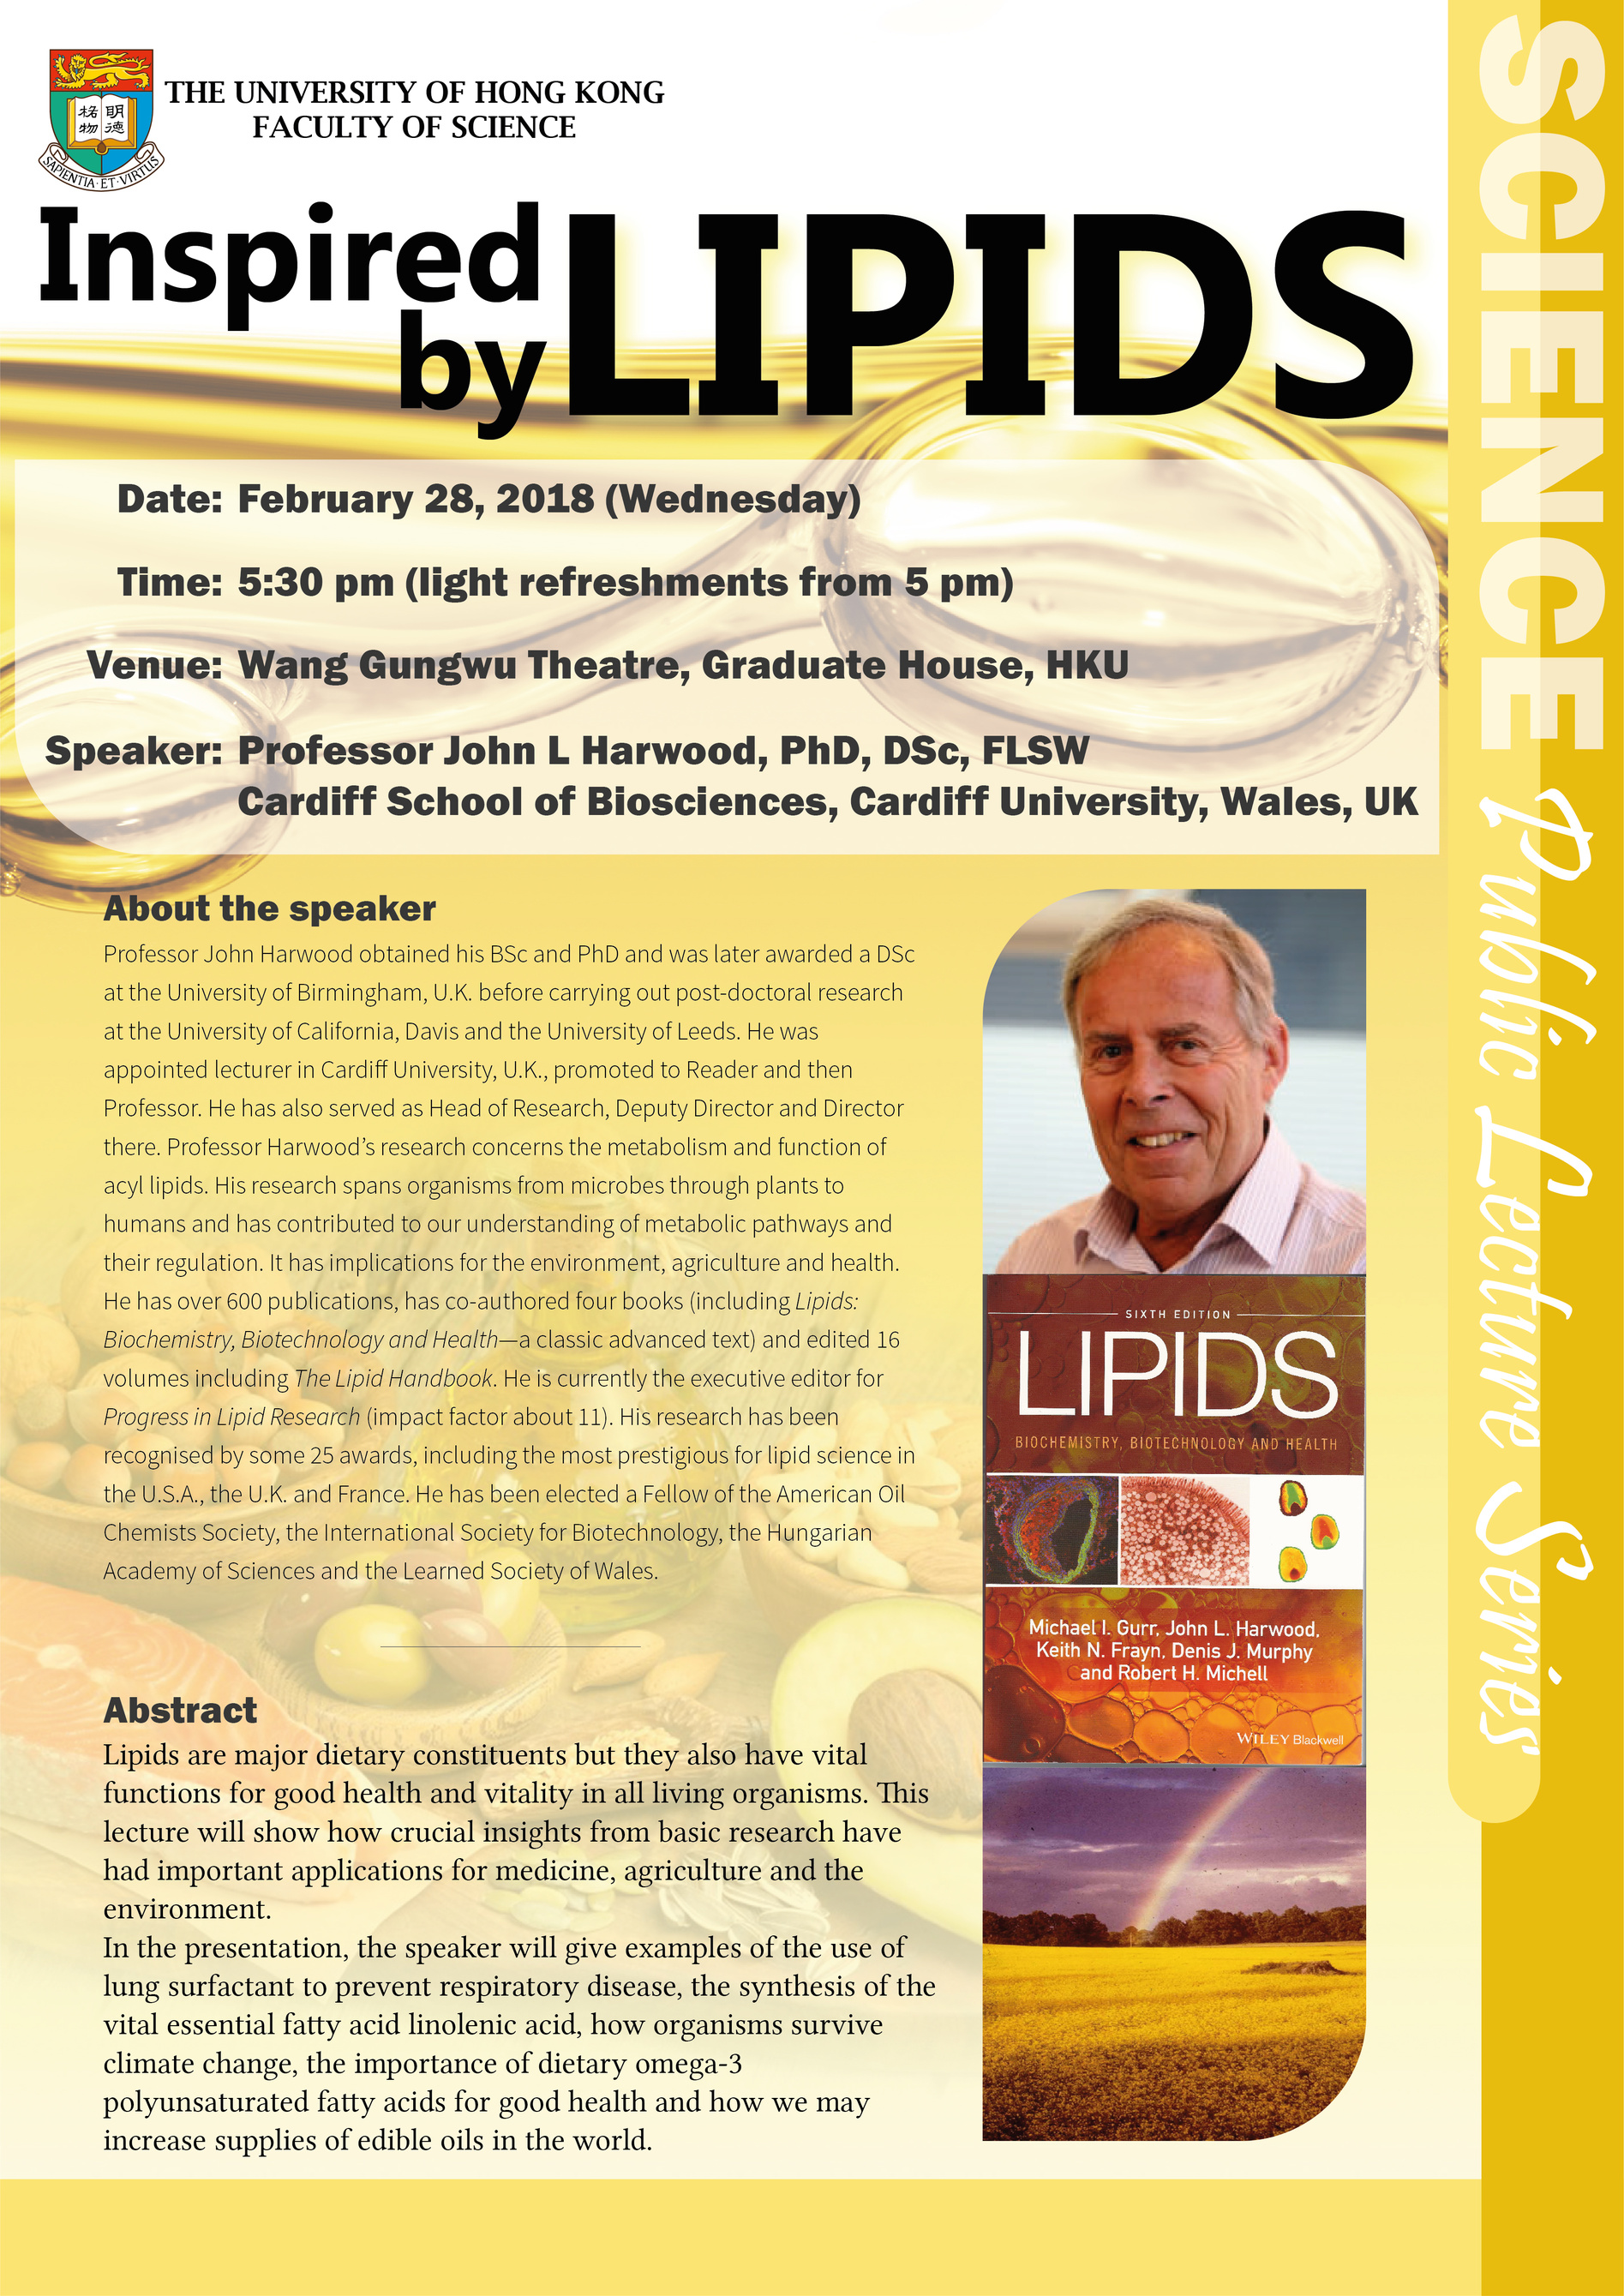 Public Lecture: Inspired by Lipids